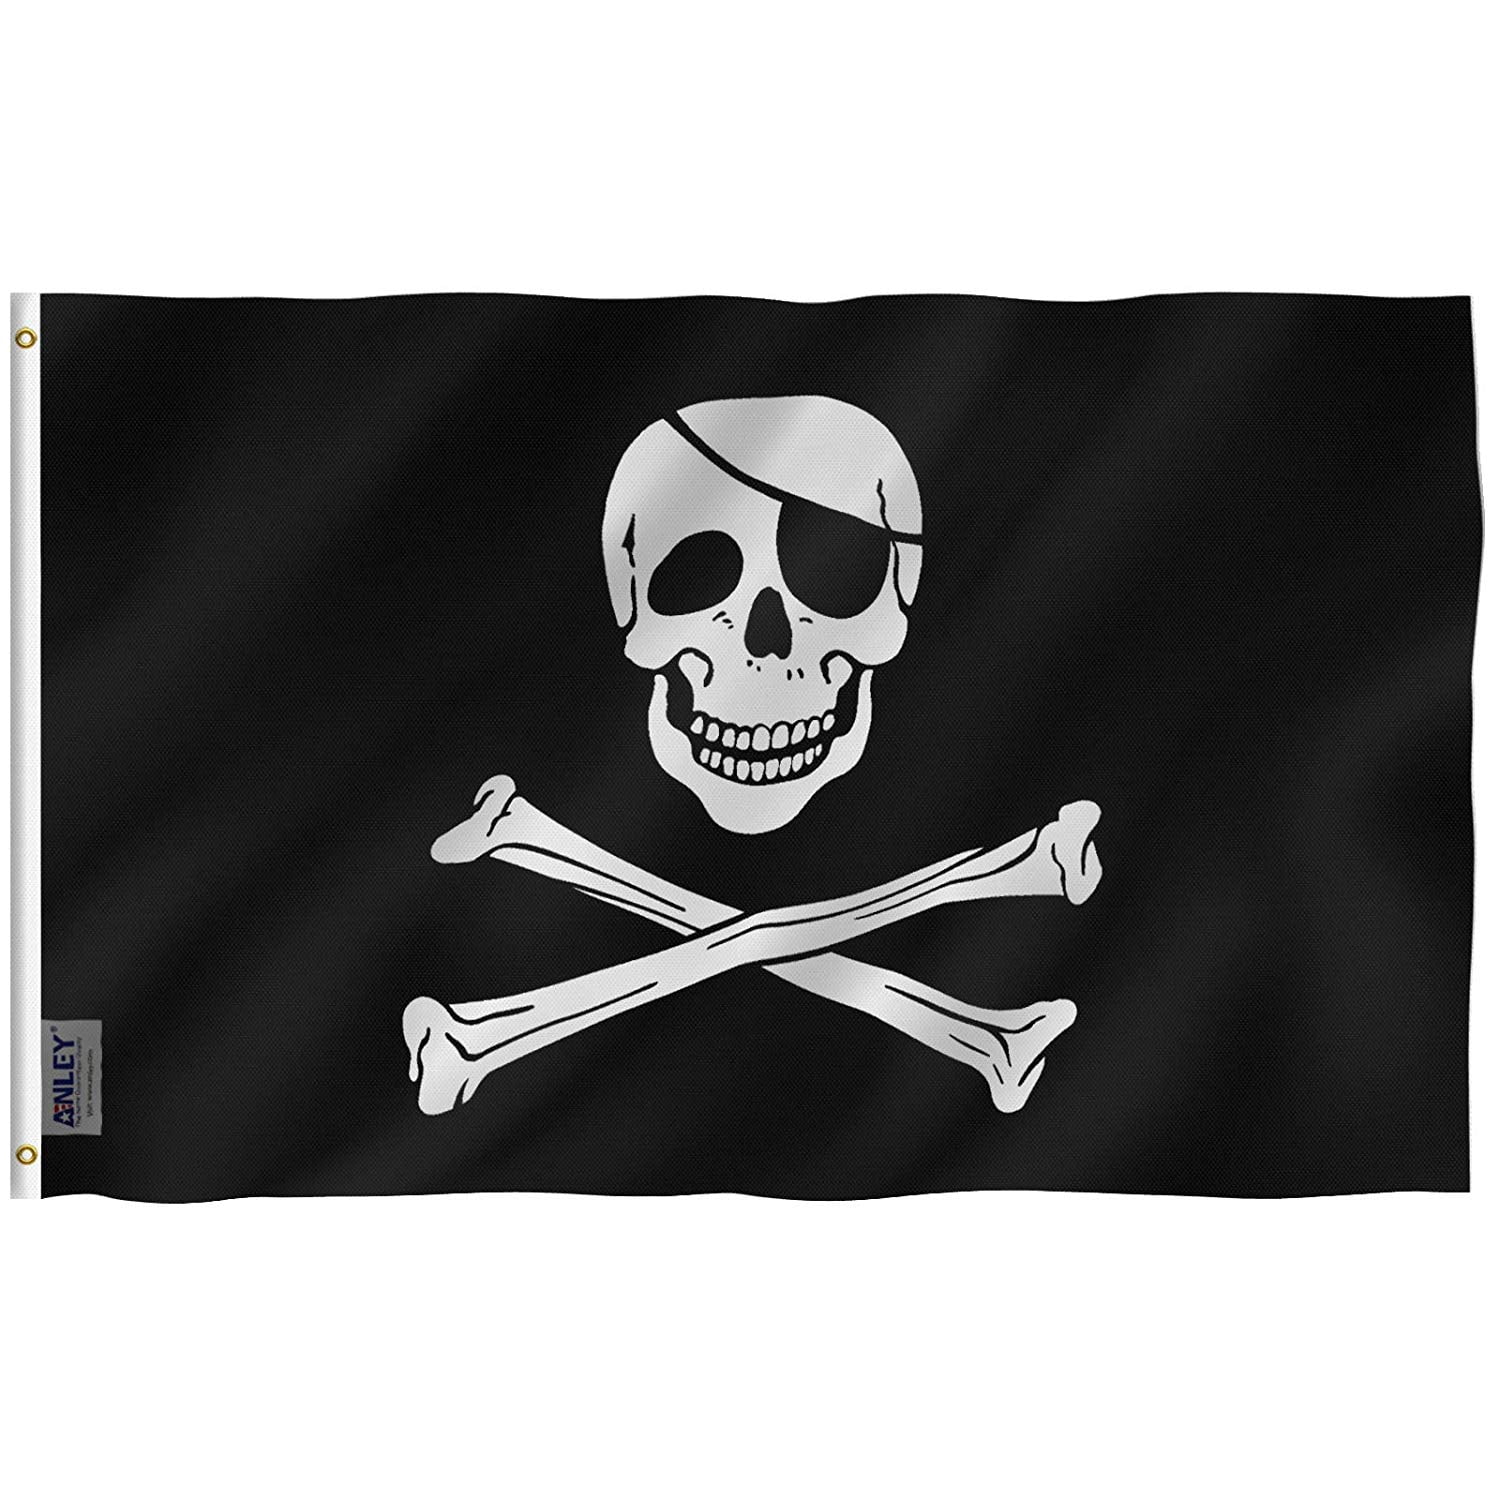 Jolly Roger Pirate Skull Crossbones Flag Stick 12inx18in FAST USA SHIP 6 FLAGS 